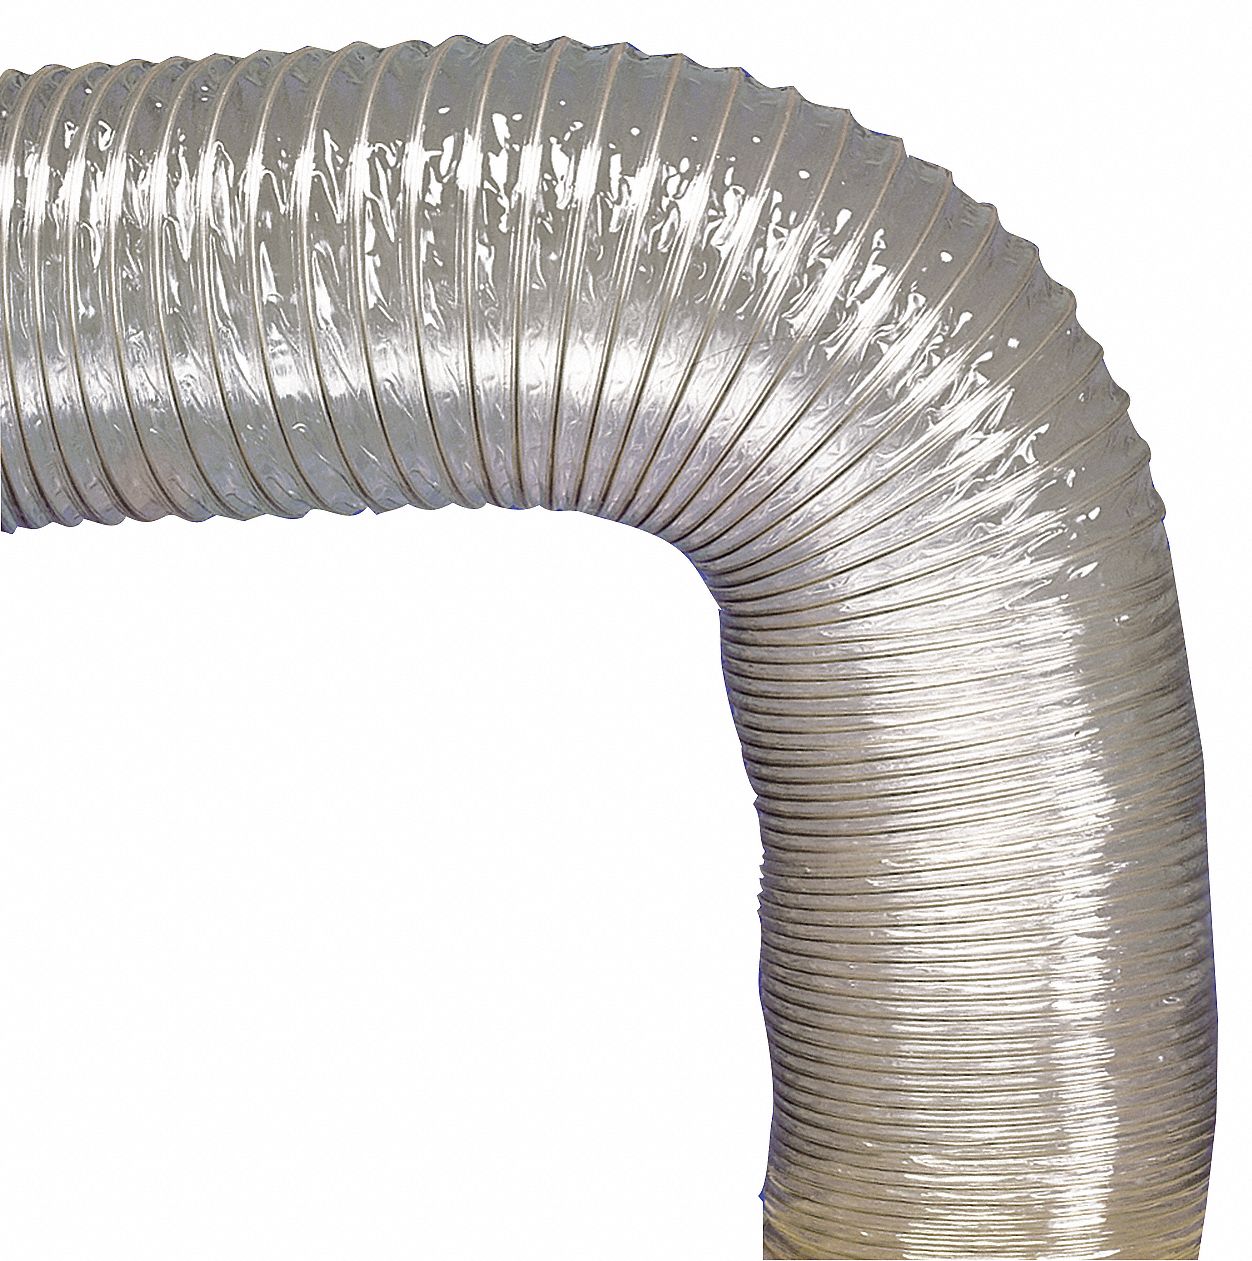 L,Rubber Id,25 Ft Hi-Tech Duravent 0337-0600-0001 Ducting Hose,6 In